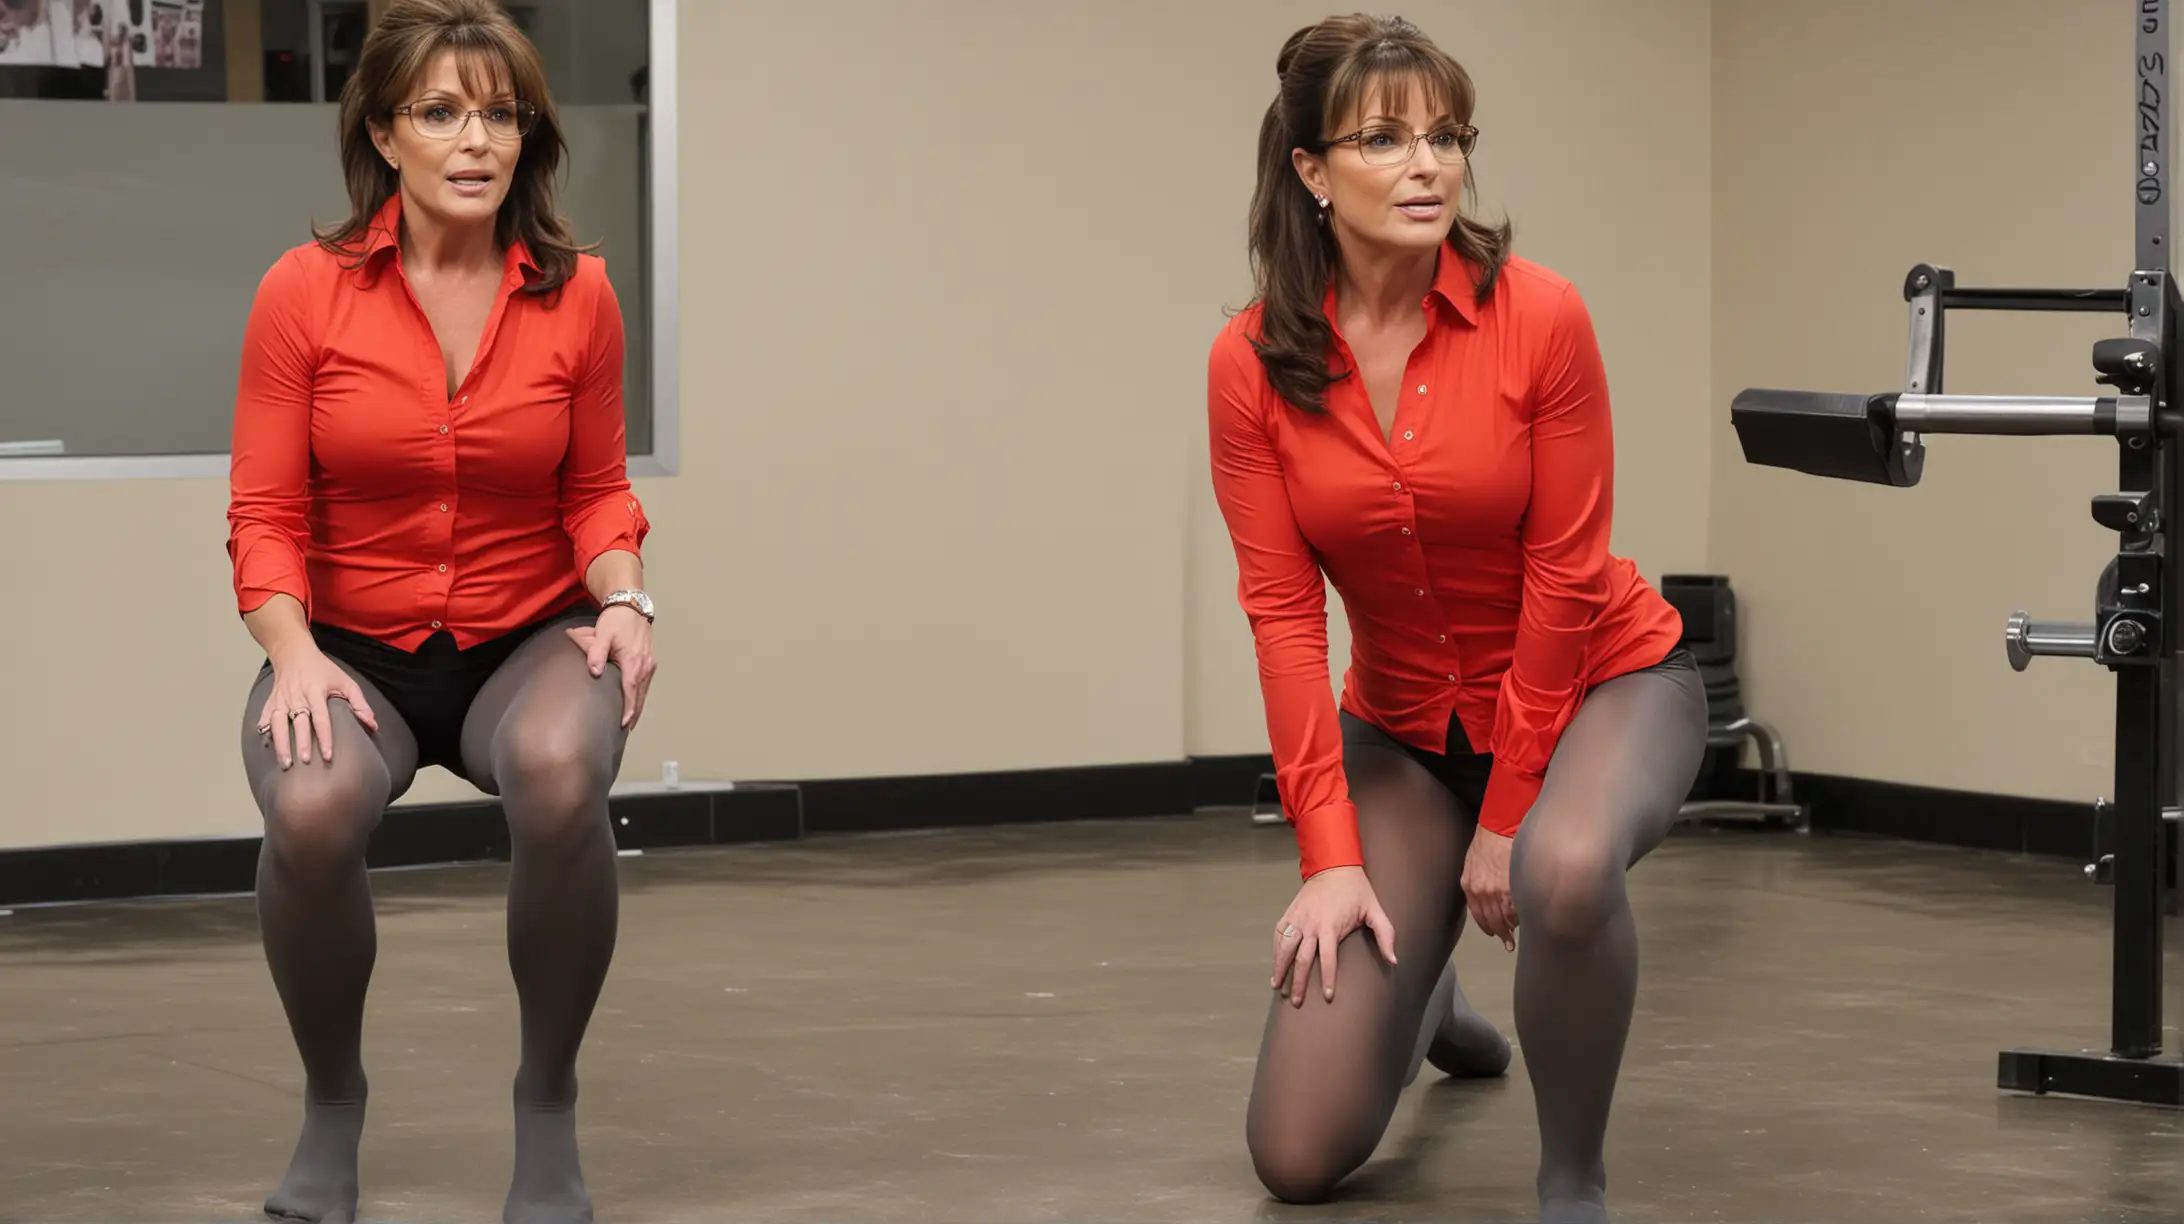 Sarah Palin and Lauren Boebert, both wearing untucked stretch red button down shirts, no pants, with gray pantyhose, squatting down in exercise class.